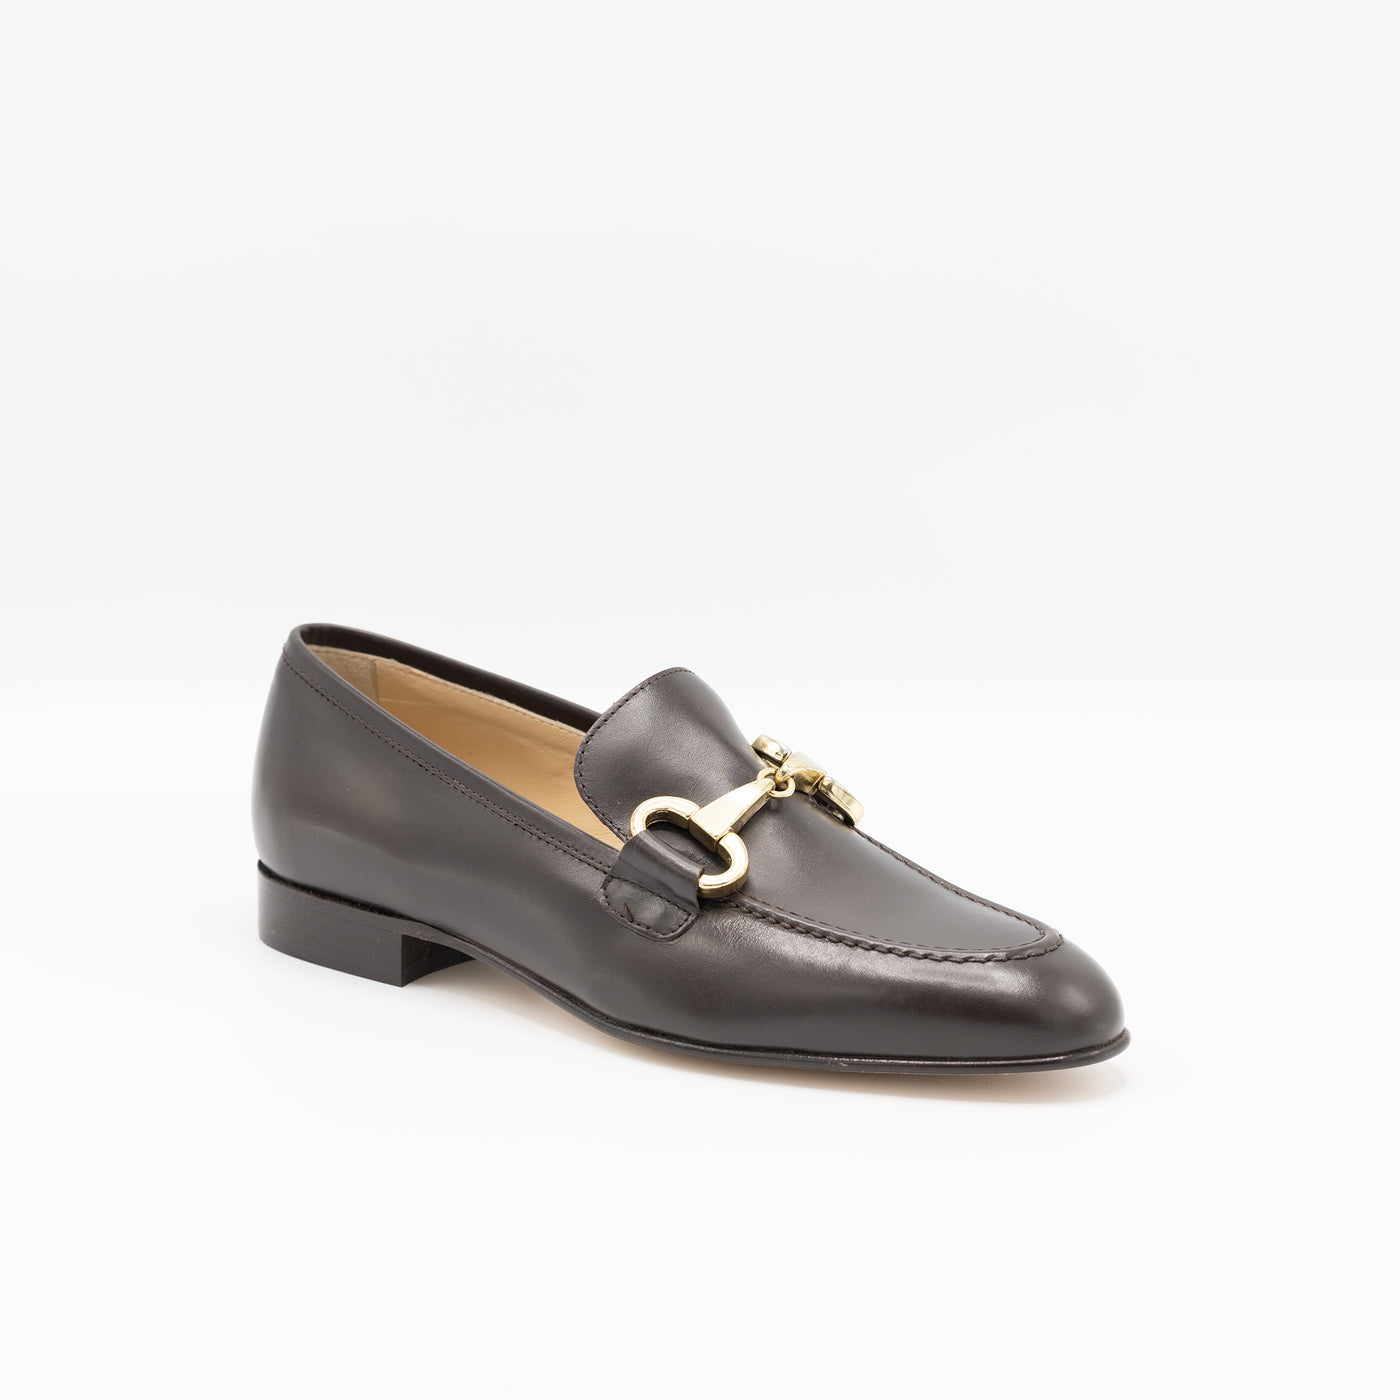 Horsebit Loafer in Brown Leather